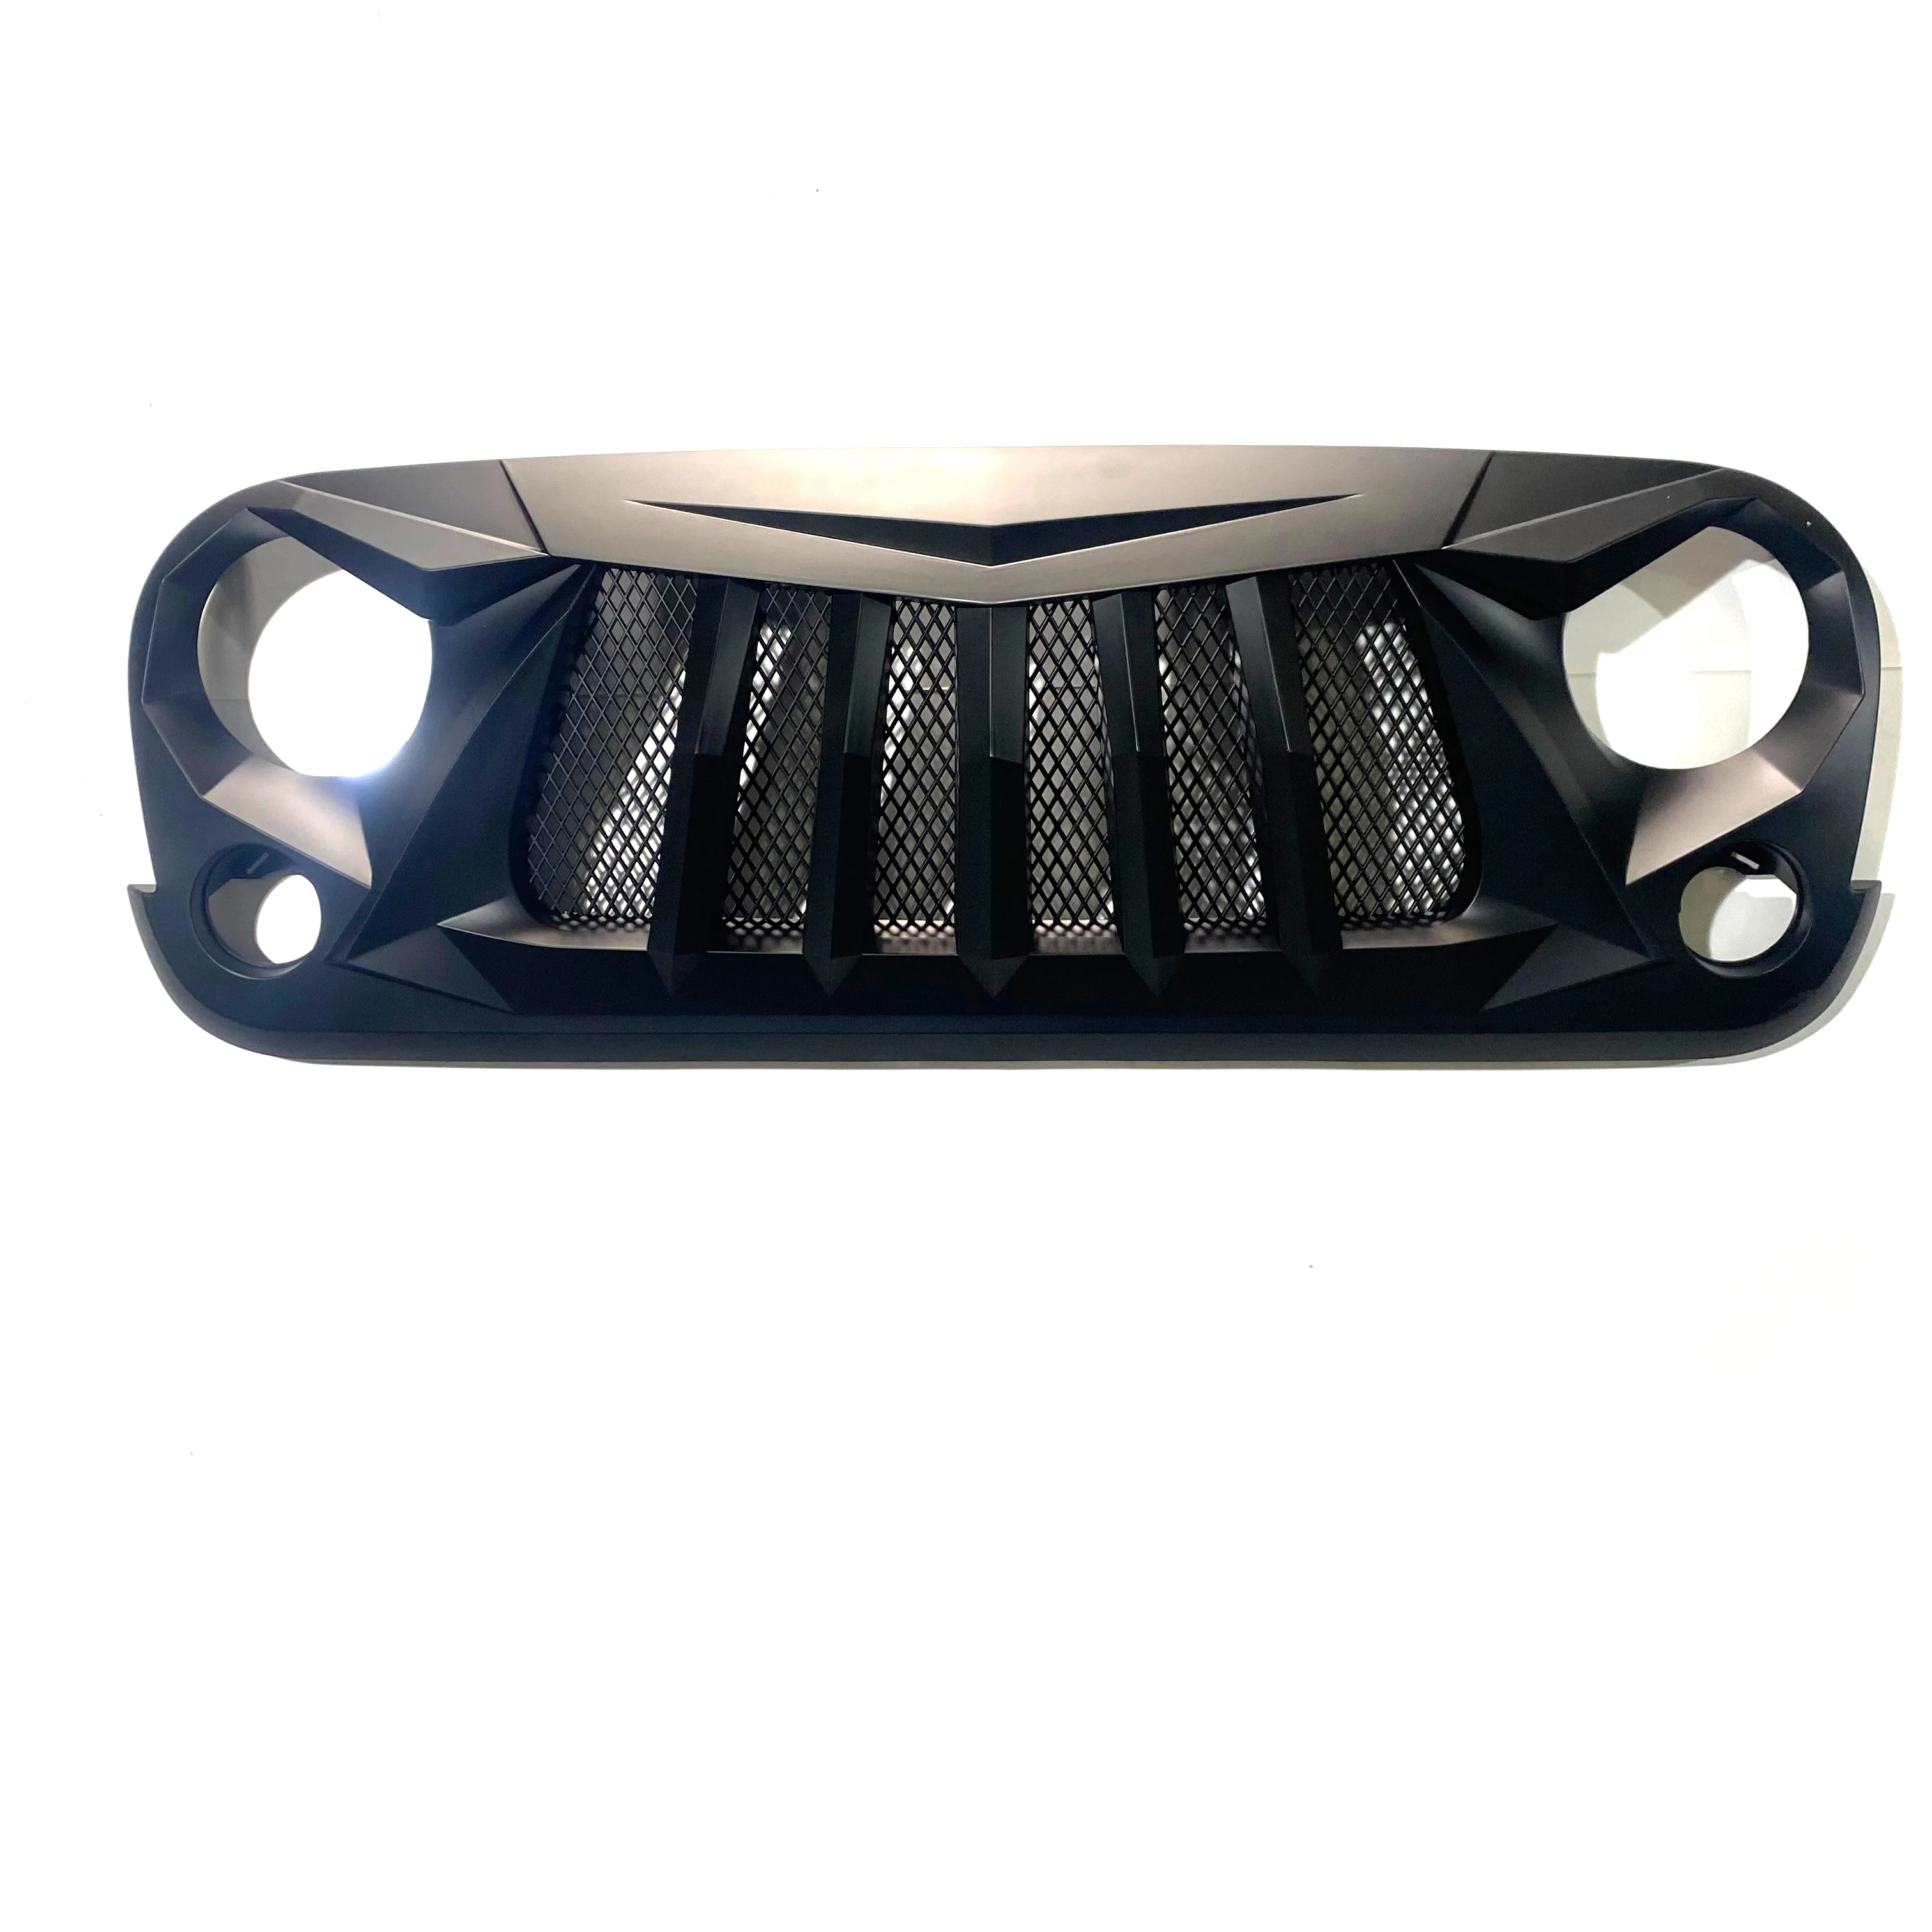 For Jeep Jk Accessories 4x4 Offroad Front Car Grille For Jeep Wrangler 2007  2008 2009 2010 2011 2012 2013 2014 2015 2016 2017 20 - Buy Grille For Jeep  Wrangler,For Jeep Wrangler Jk Accessories,Car Grille Product on 